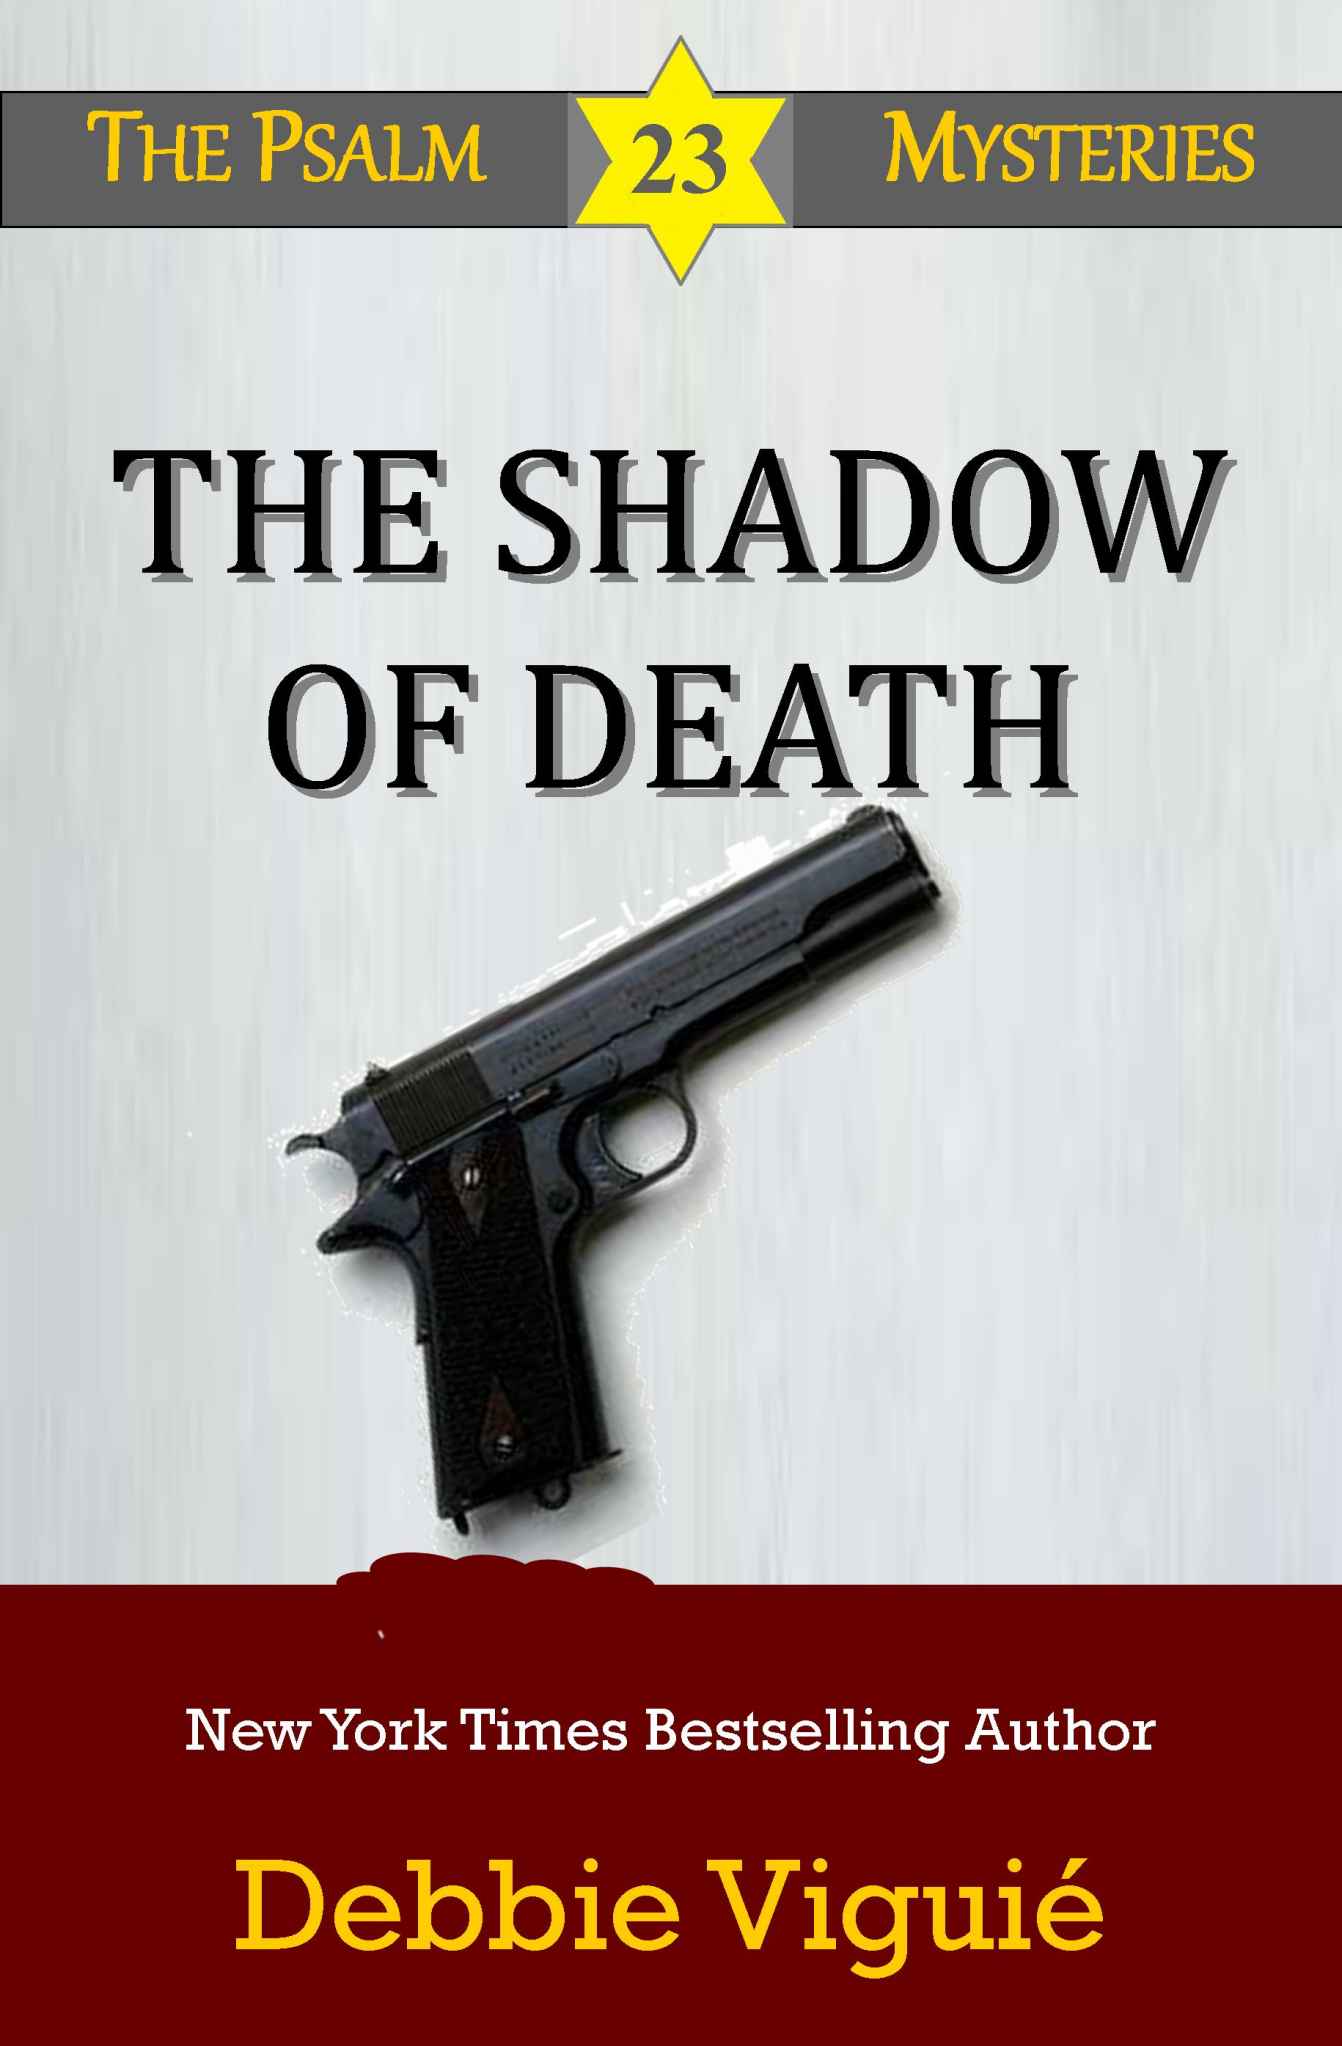 The Shadow of Death (Psalm 23 Mysteries Book 9) by Debbie Viguié